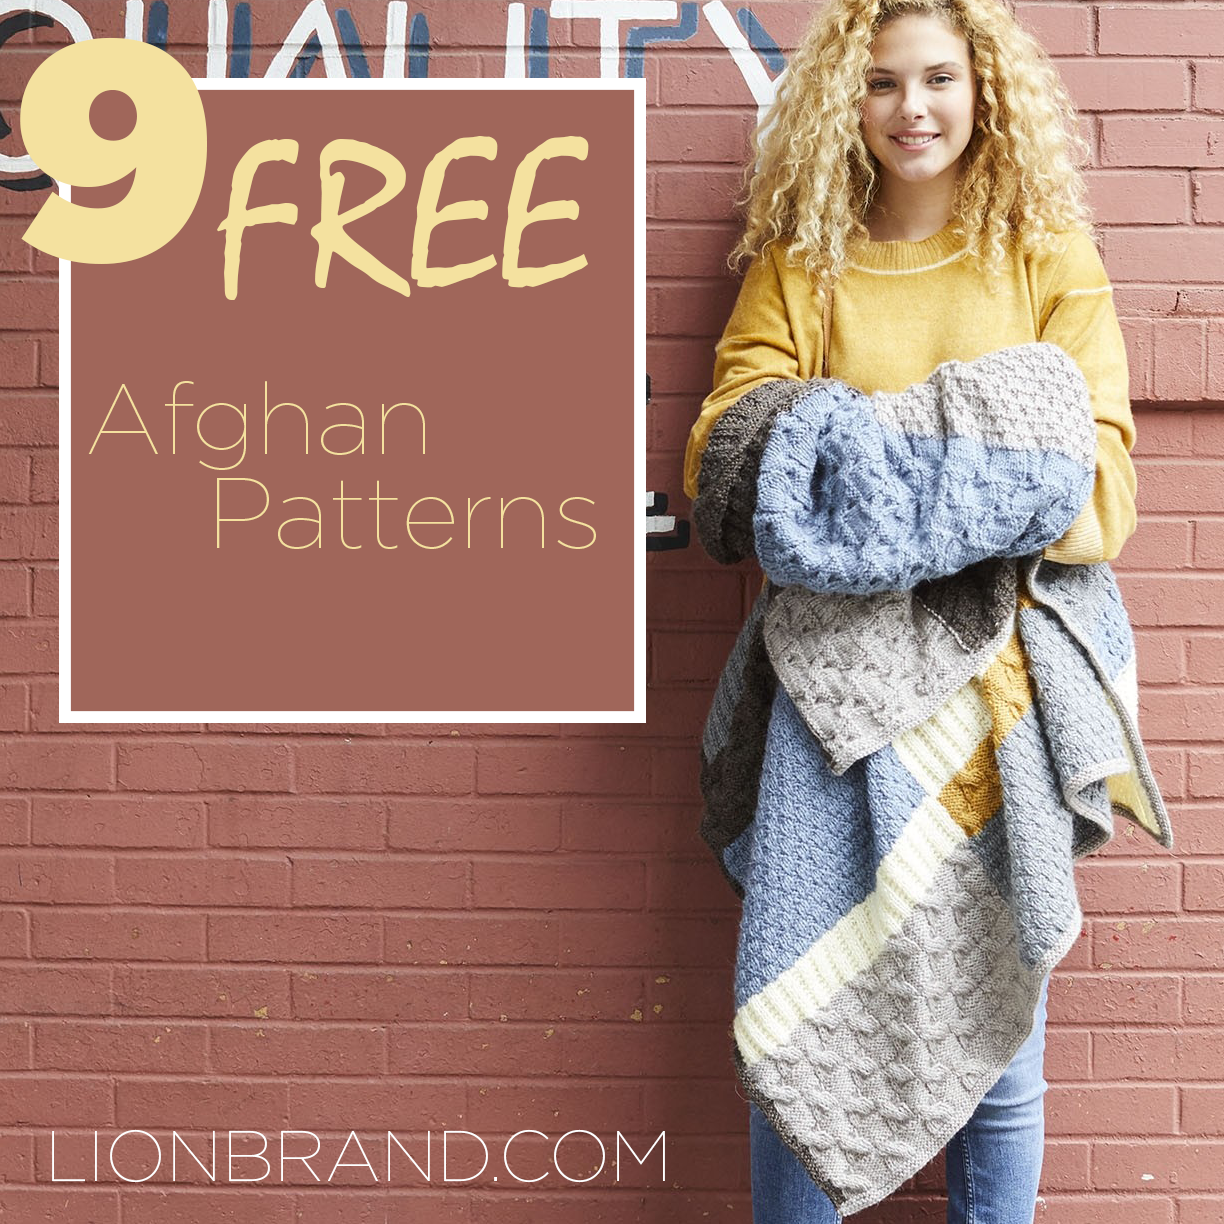 9 Free Afghan Patterns You’ll Want To Make Now!